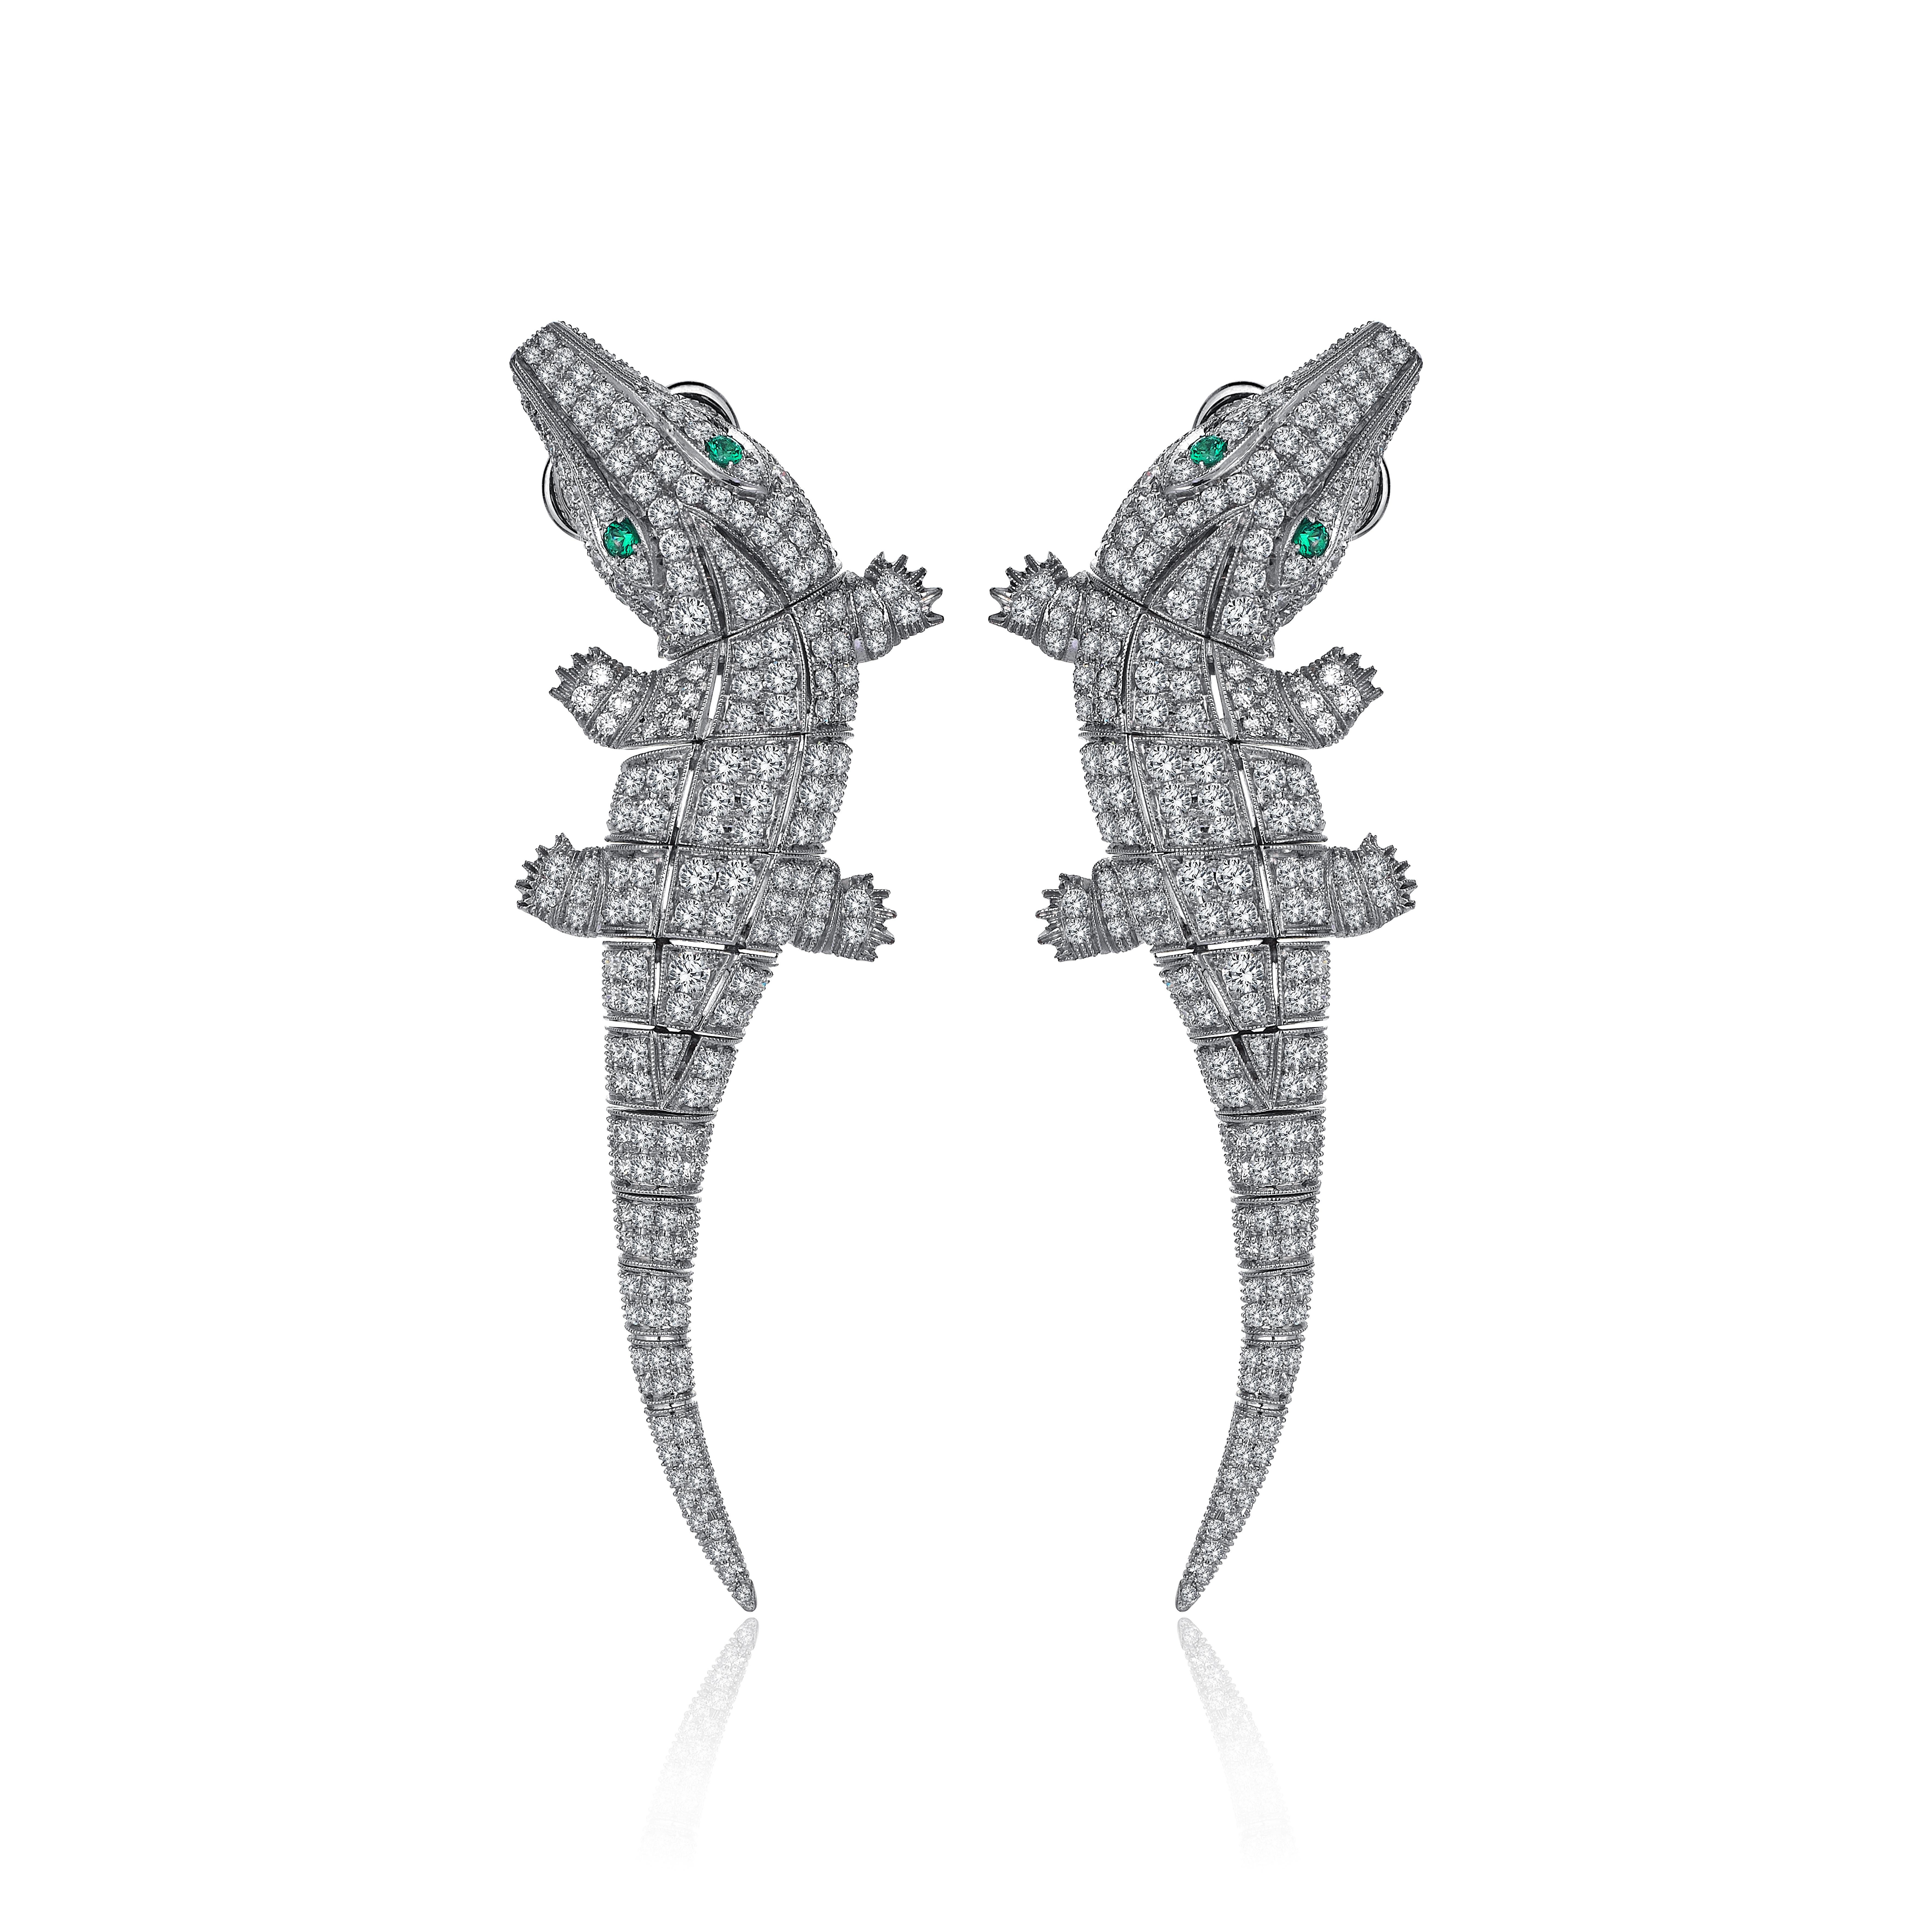 Contemporary 18 Karat White Gold Monan Another World 4.98 Carat Crocodile Earring For Sale